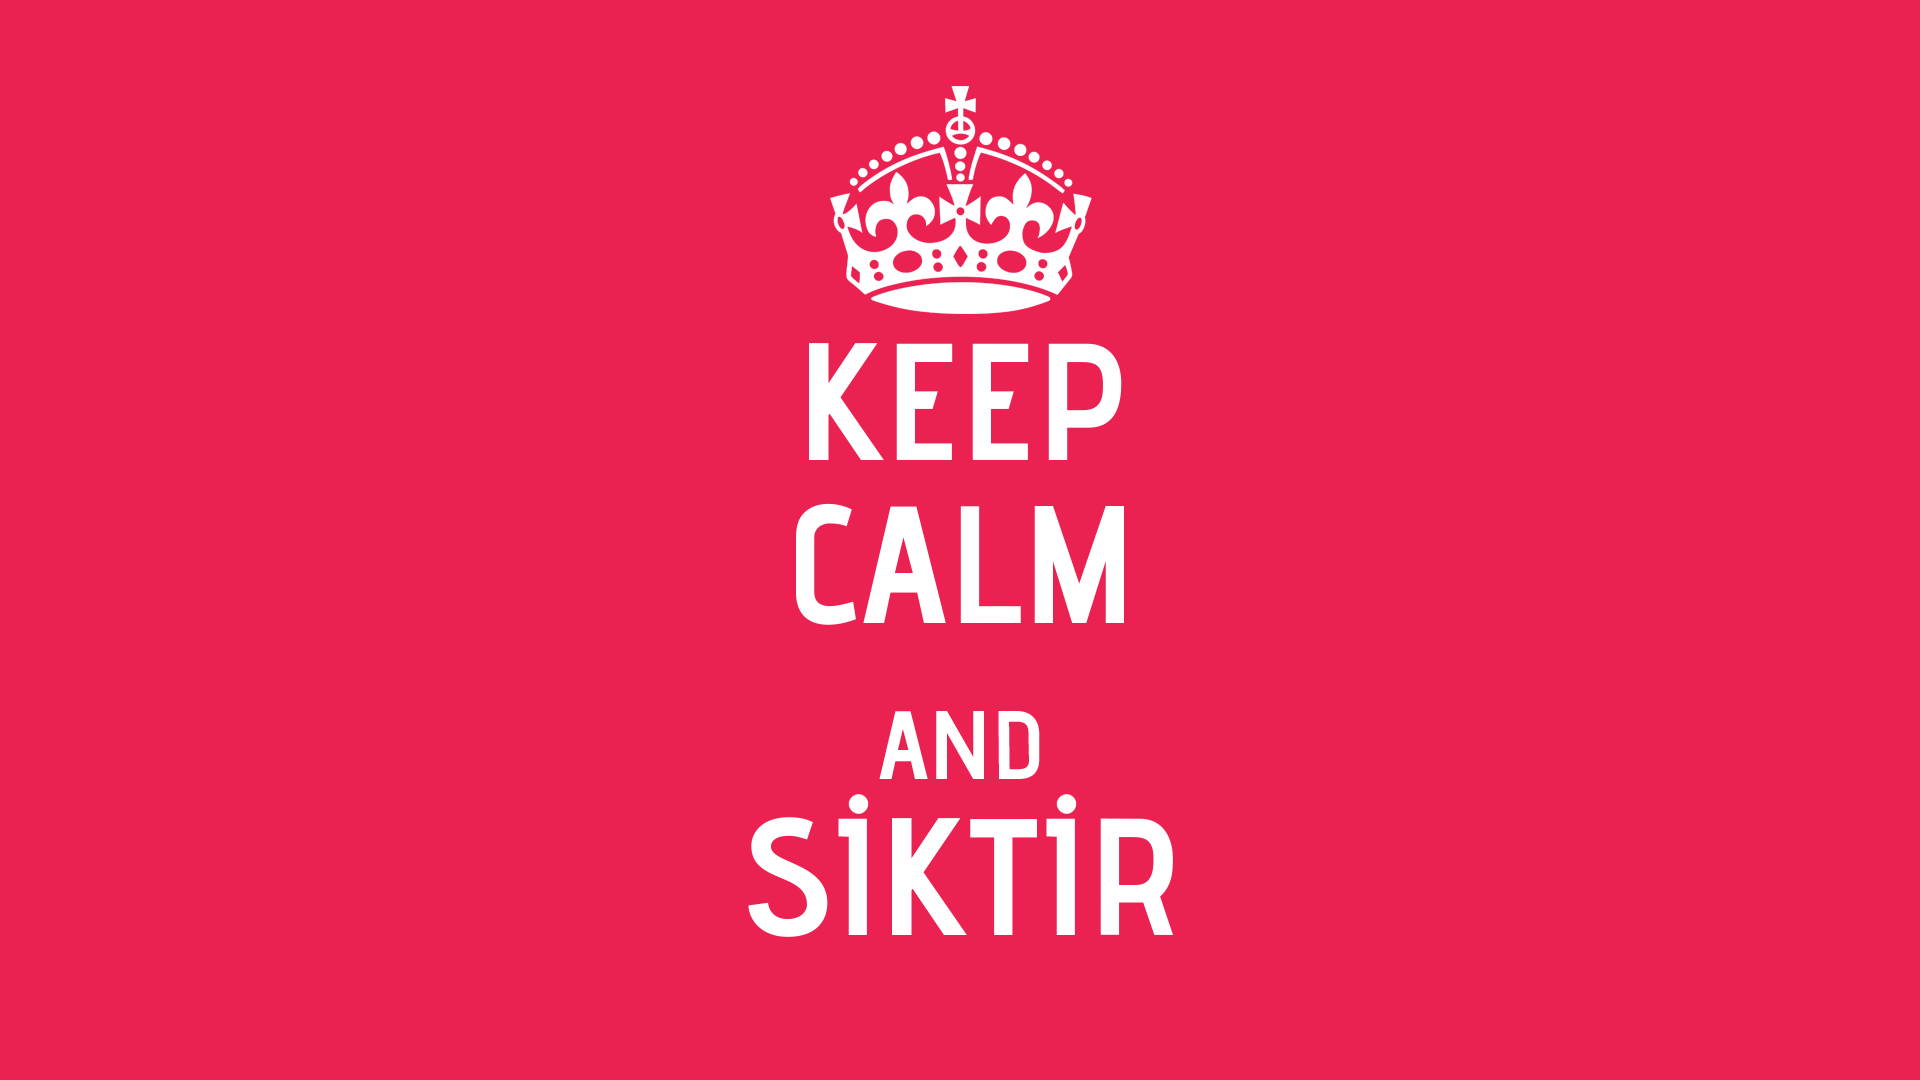 General 1920x1080 Keep Calm and... calm Siktir fuck red gradient pink background